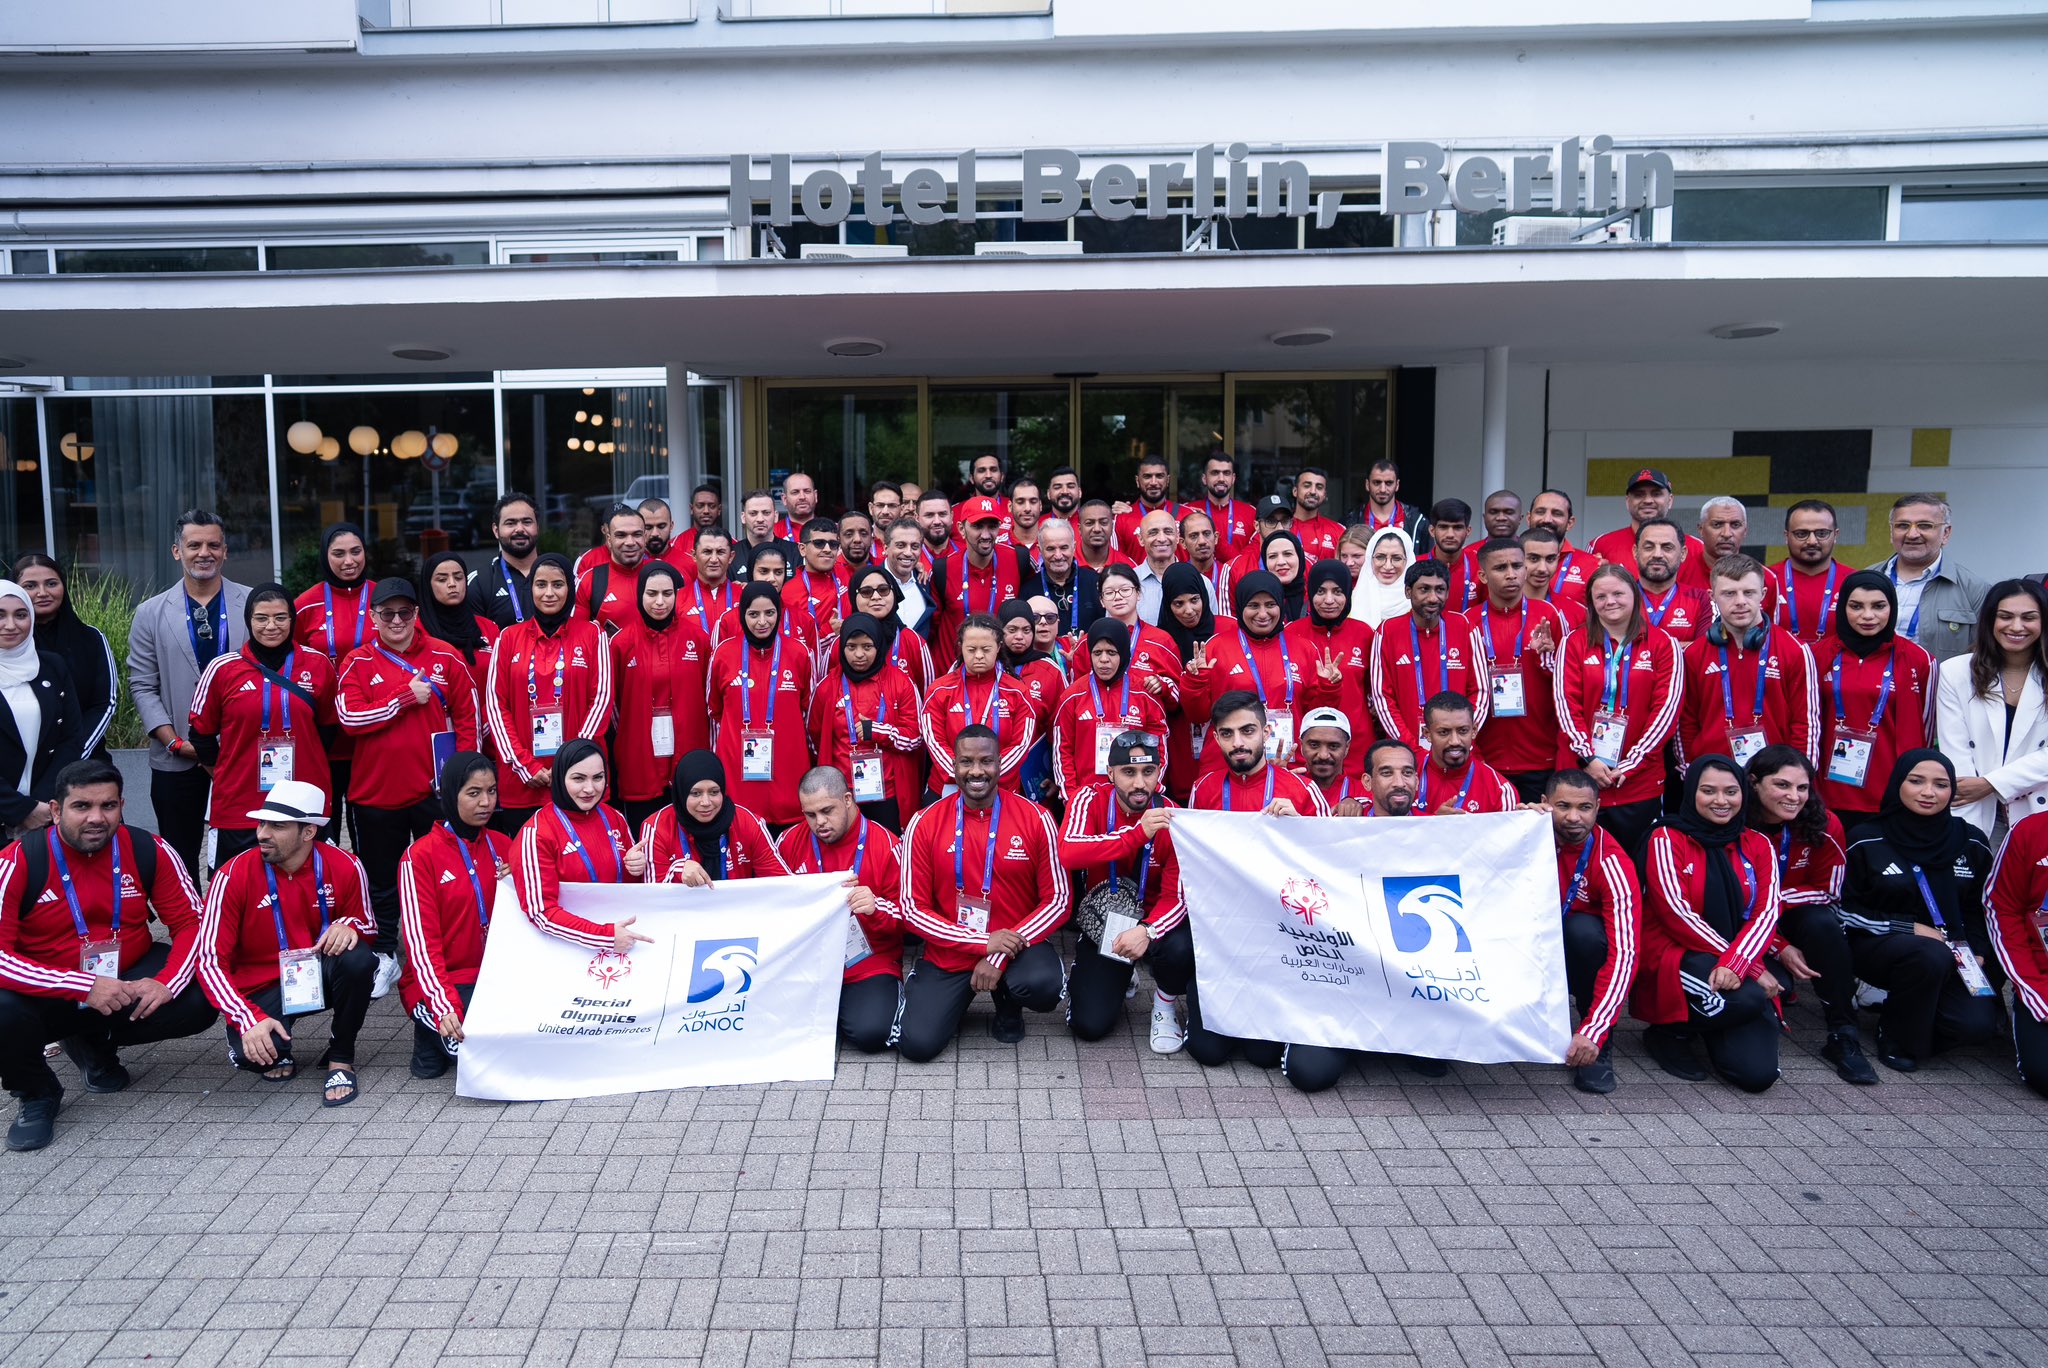 Yousef Al Otaiba and members of Team UAE stand for a photo at the Berlin Special Olympics World Games.